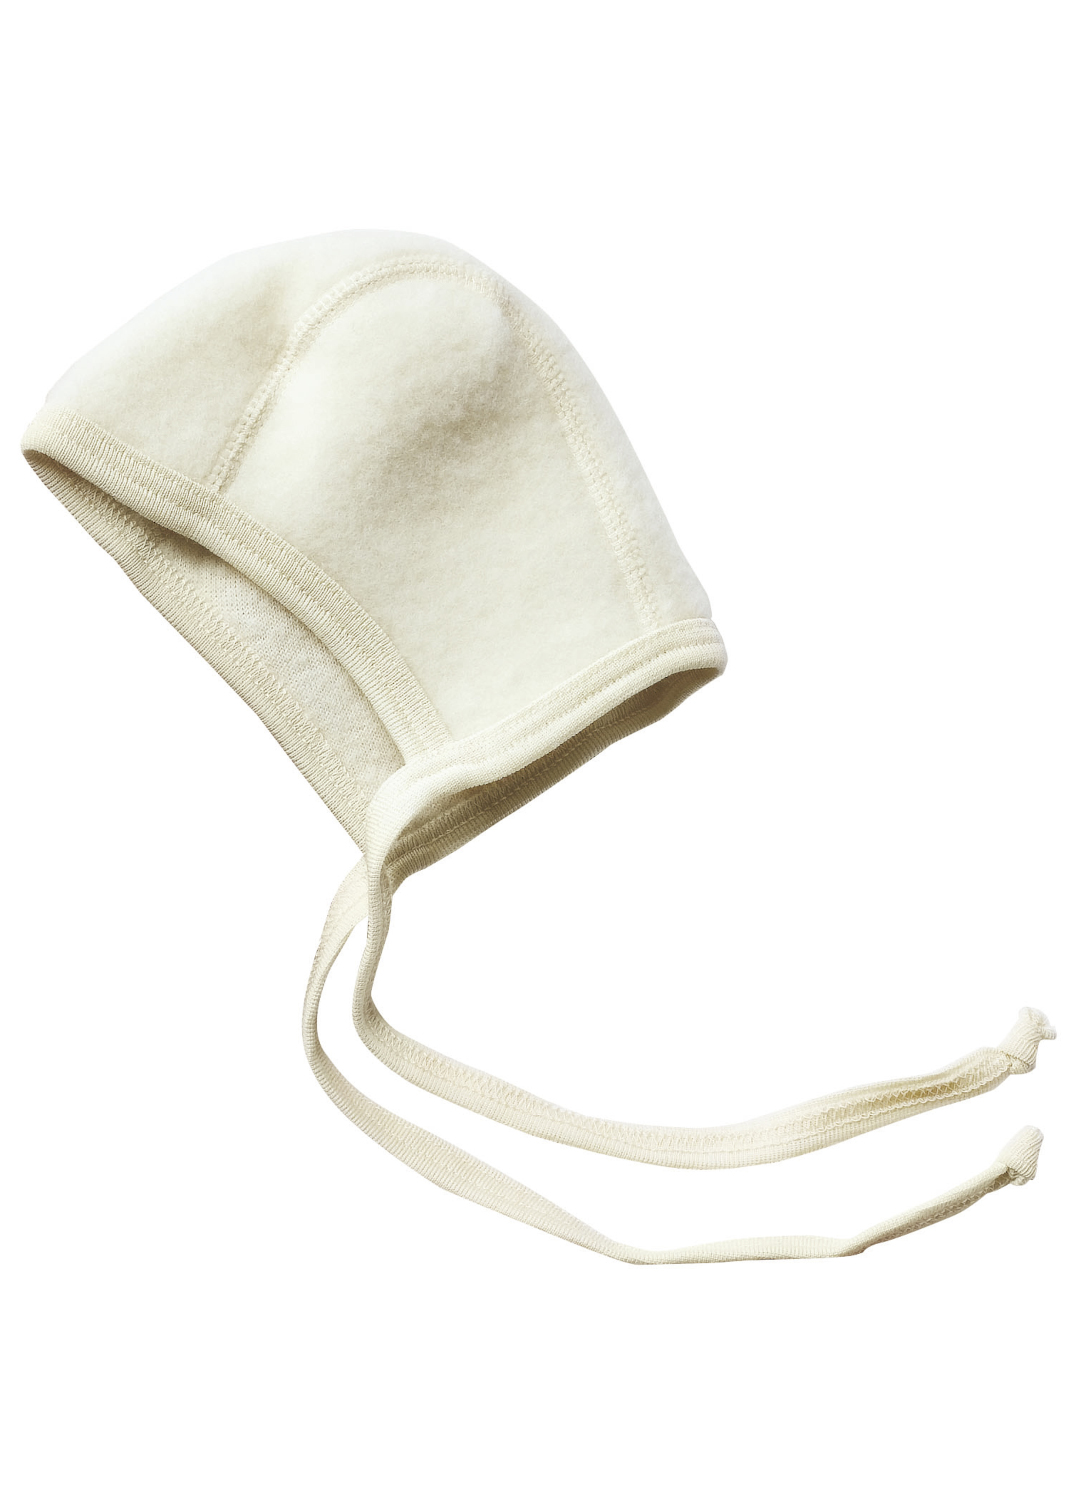 Hat for Babies and Children in organic wool fleece - Natural